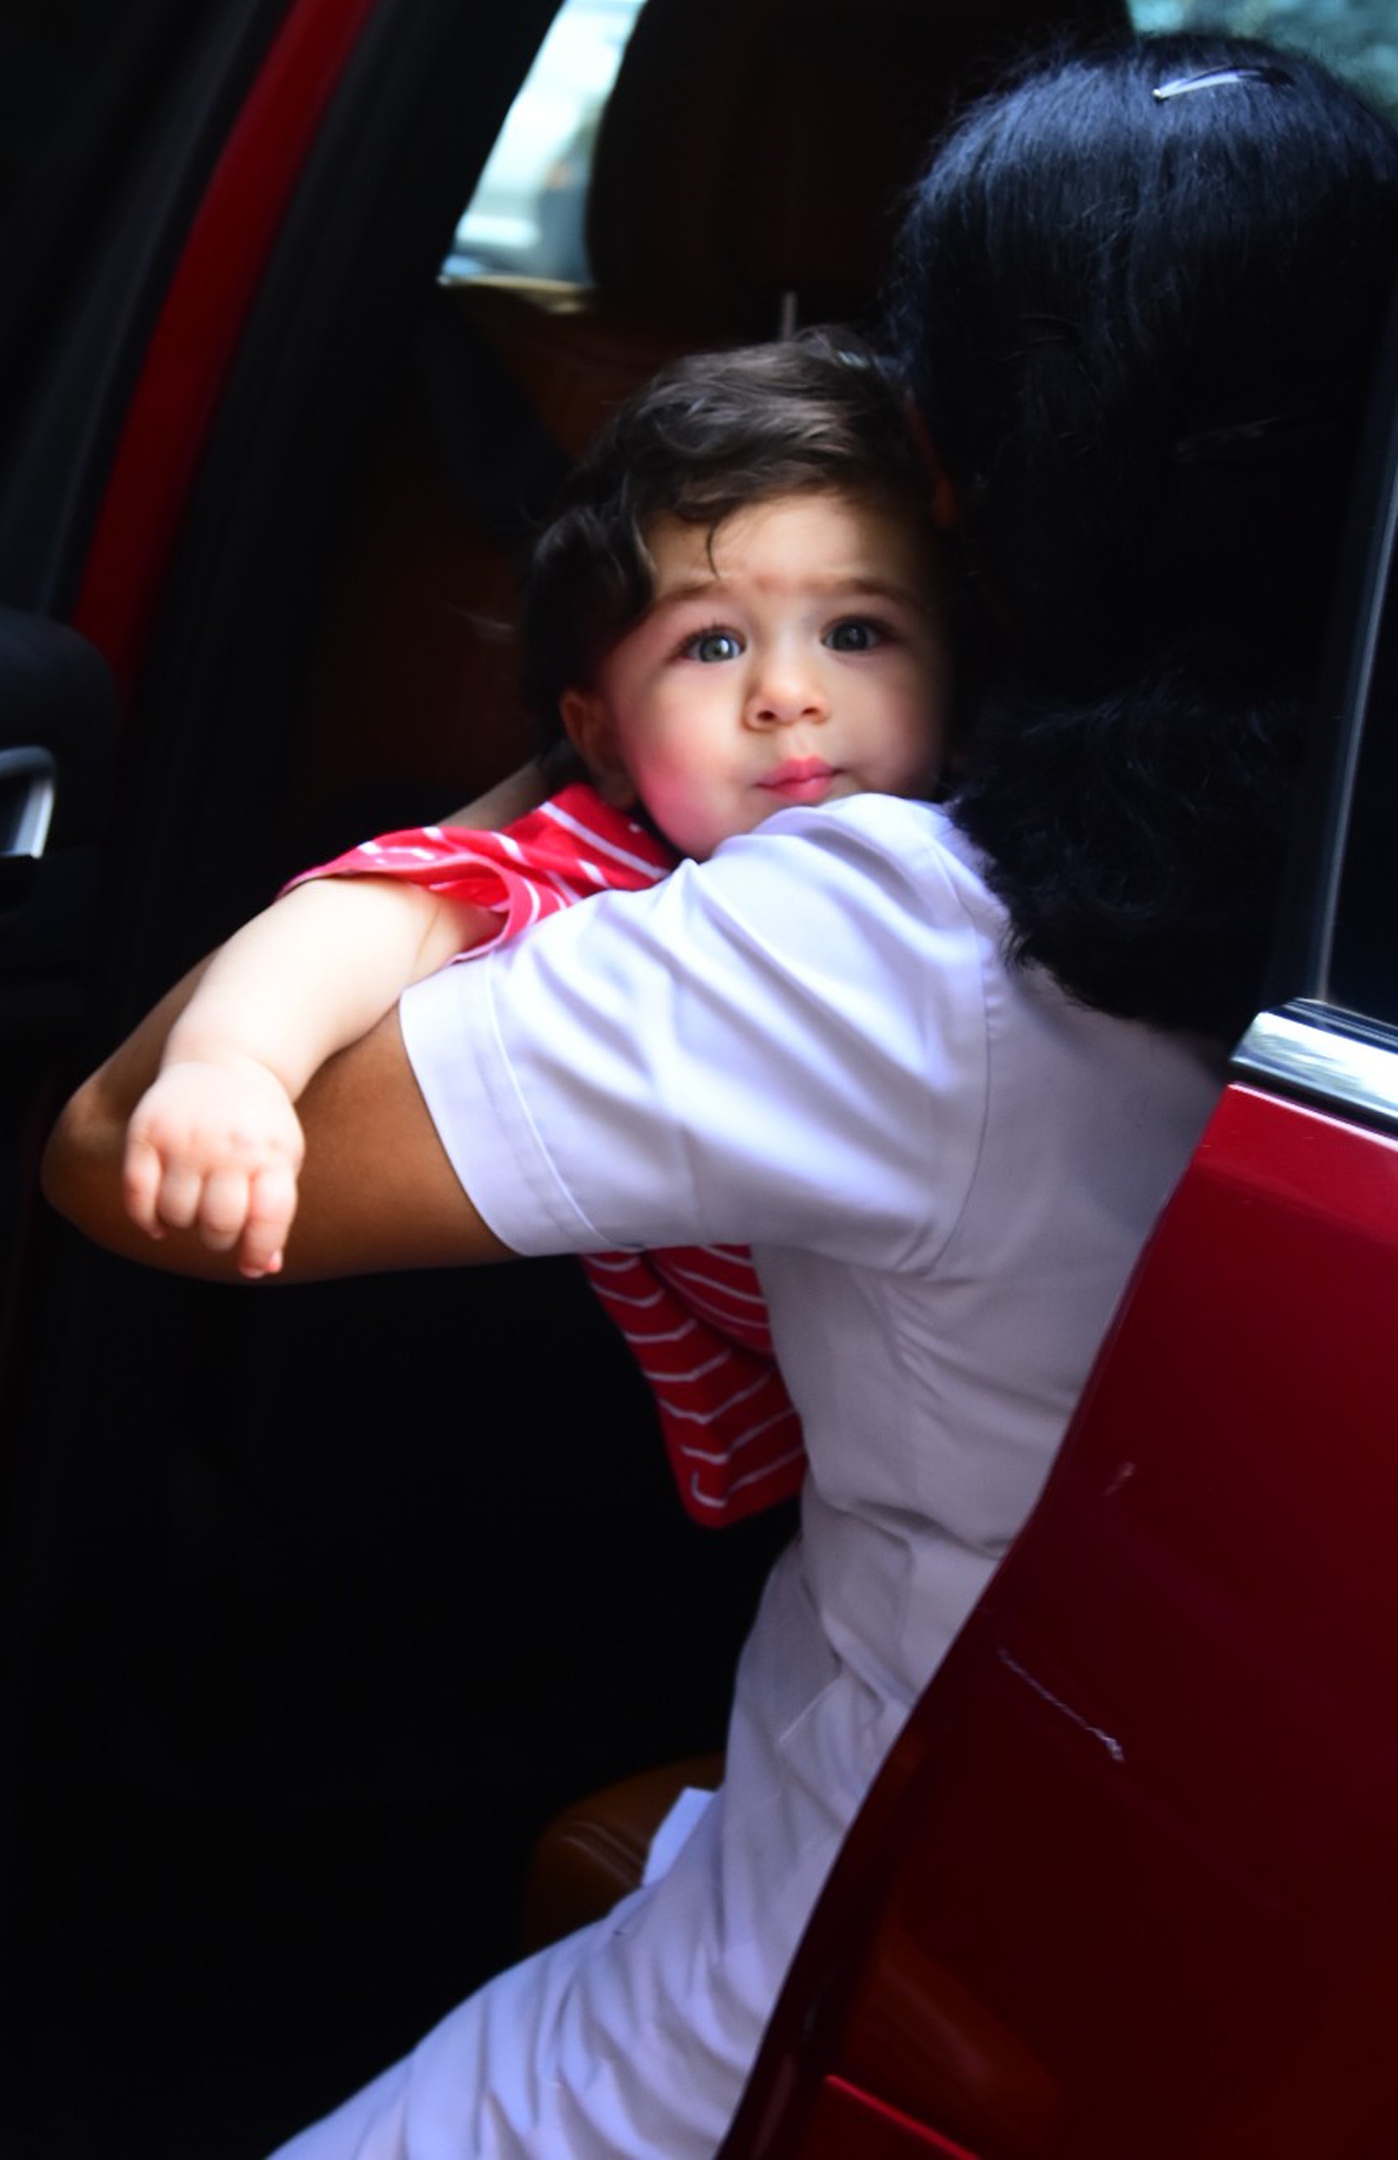 Taimur and Inaaya pictures